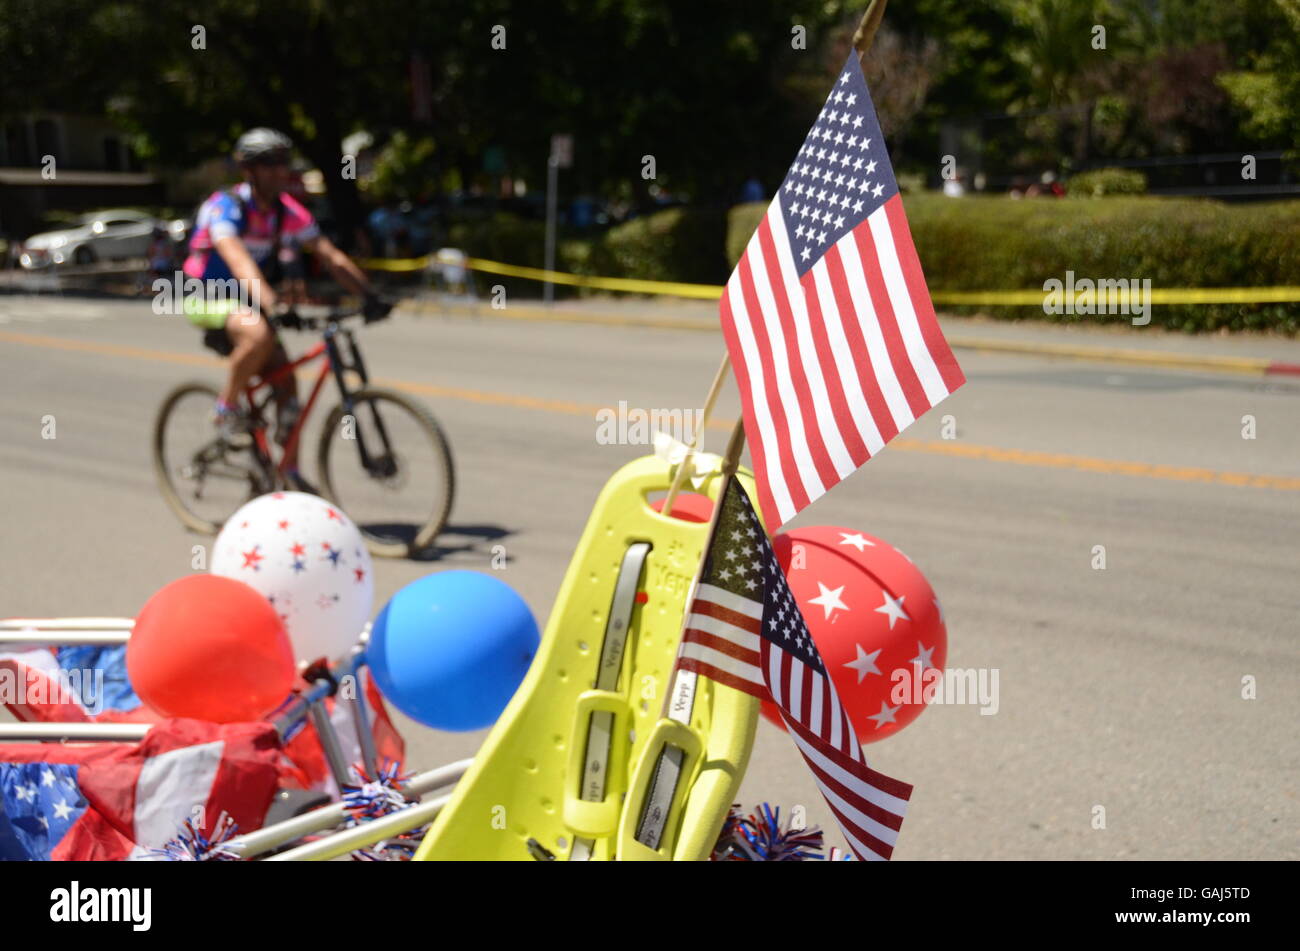 A bicyclist rides past a decorated bicycle after the Fourth of July parade in Ross, California in Marin County. Stock Photo